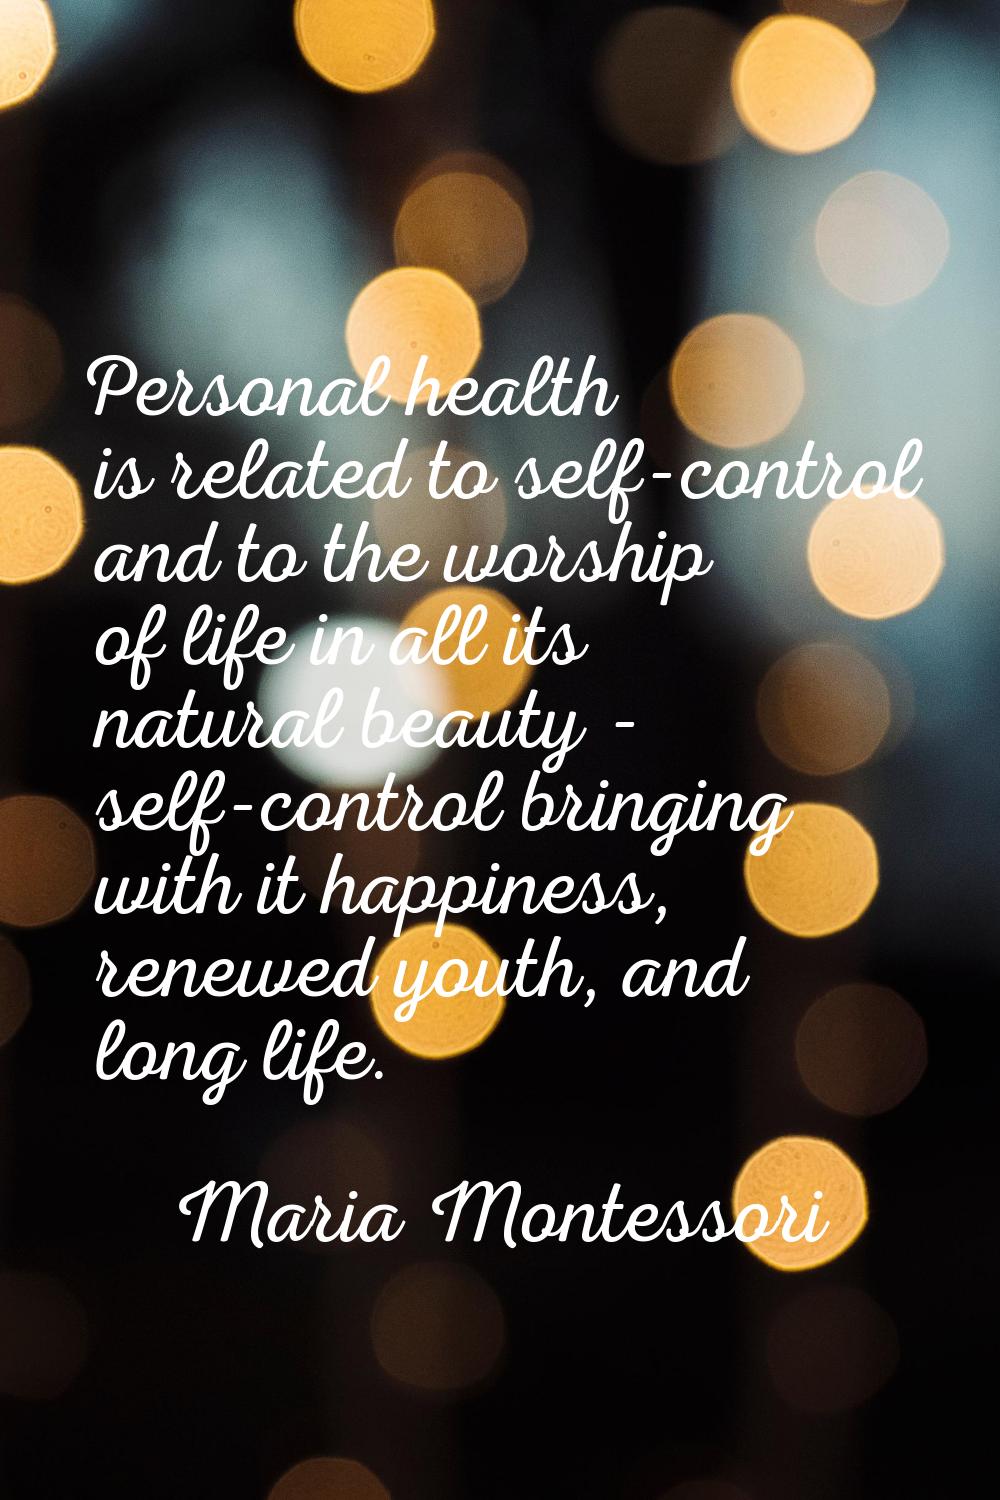 Personal health is related to self-control and to the worship of life in all its natural beauty - s